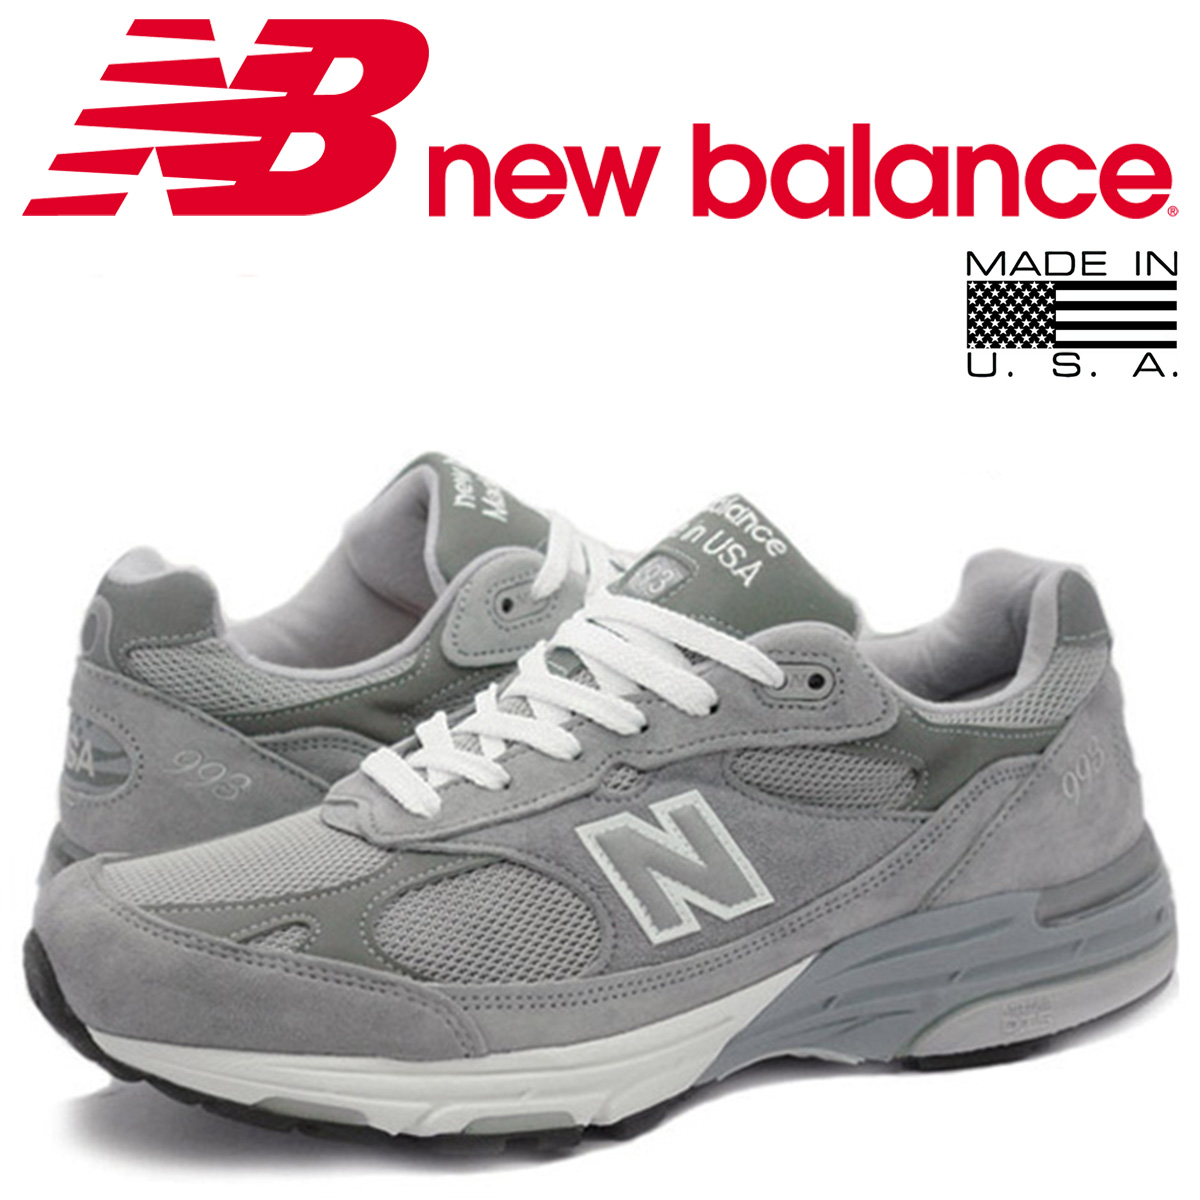 jim's new balance outlet